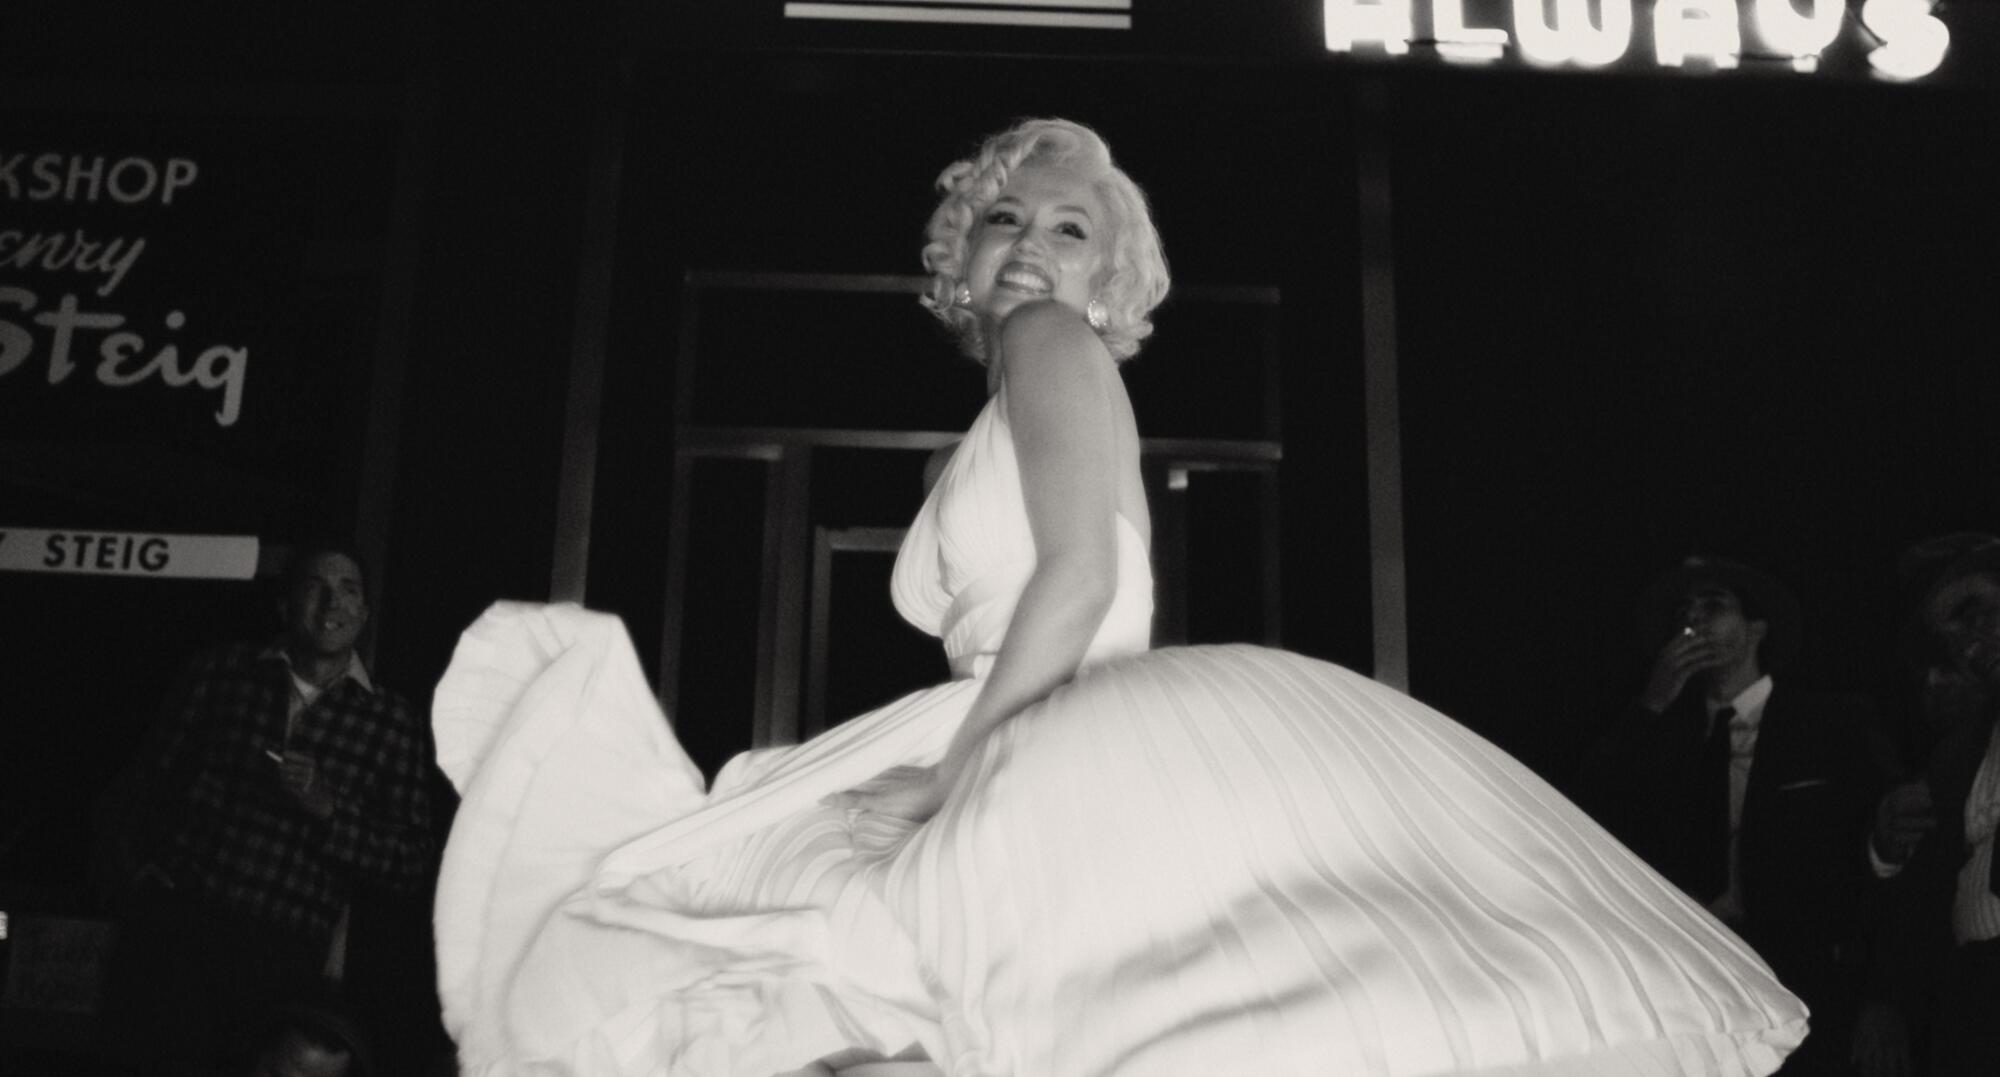 A black-and-white image of a blond woman posing in a billowing, white dress